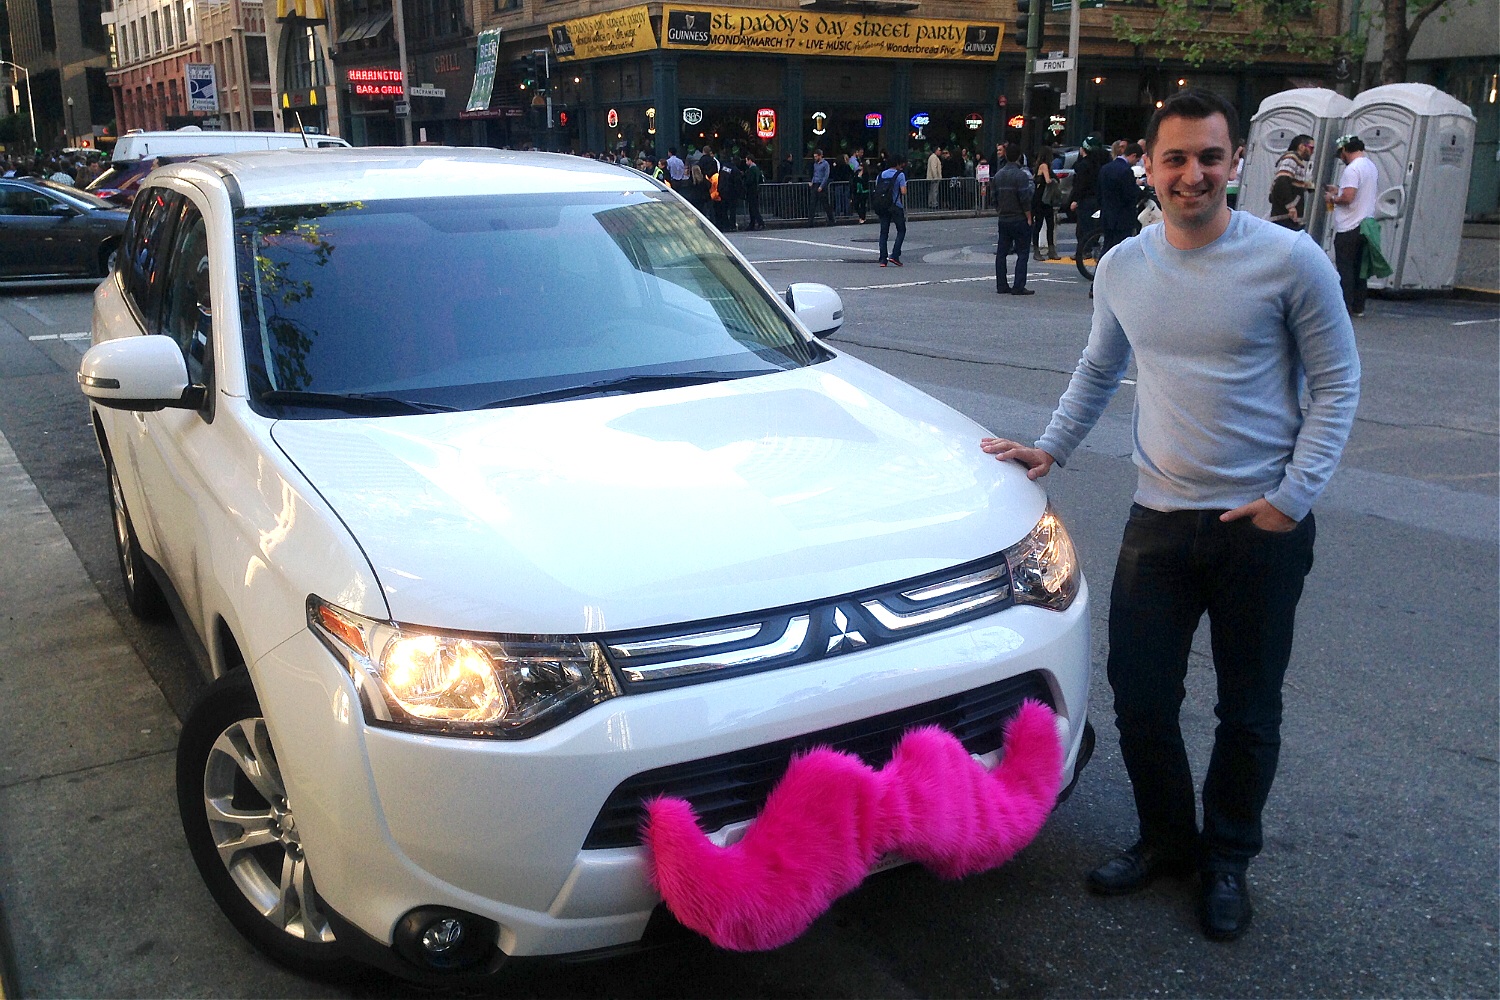 Lyft CEO John Zimmer poses with his ride in San Francisco on March 17, 2014